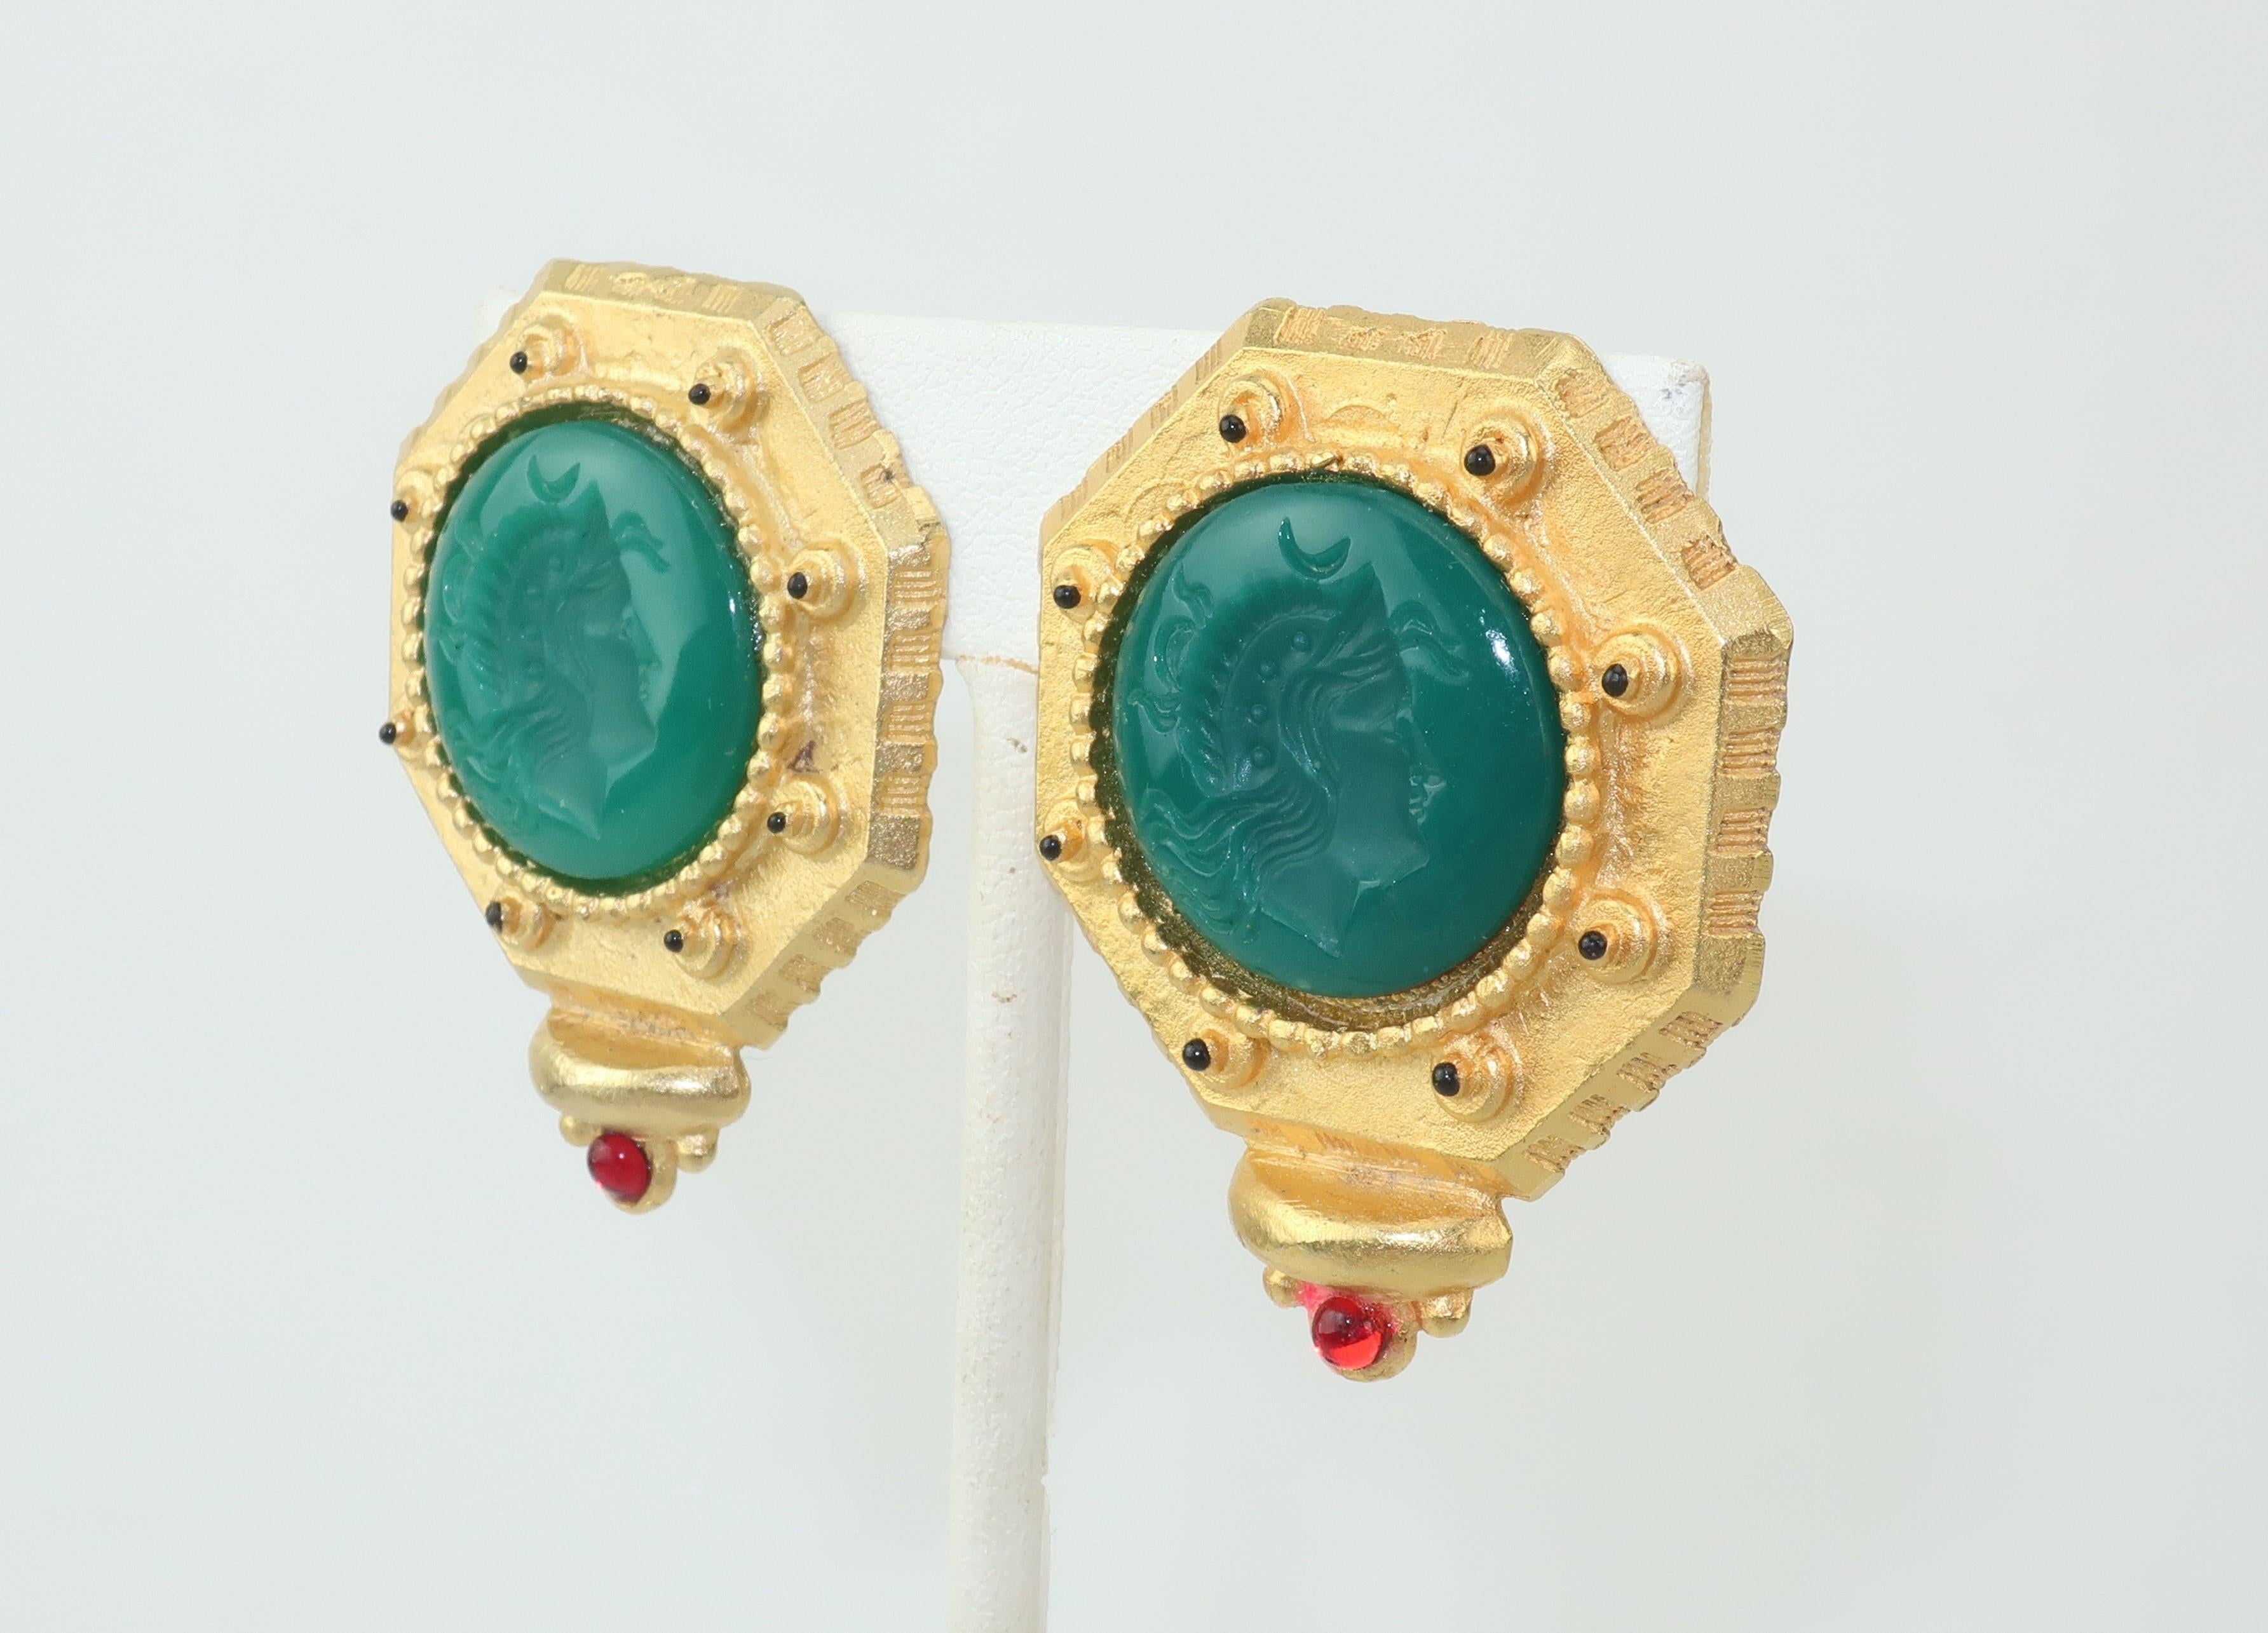 Handsome, stately and stylish!  These 1980's Gerard Yosca matte gold tone earrings have a neoclassical look with emerald green glass cameo style decorations featuring soldiers accented by black enamel and a red cabochon stone.  Outfitted with clip